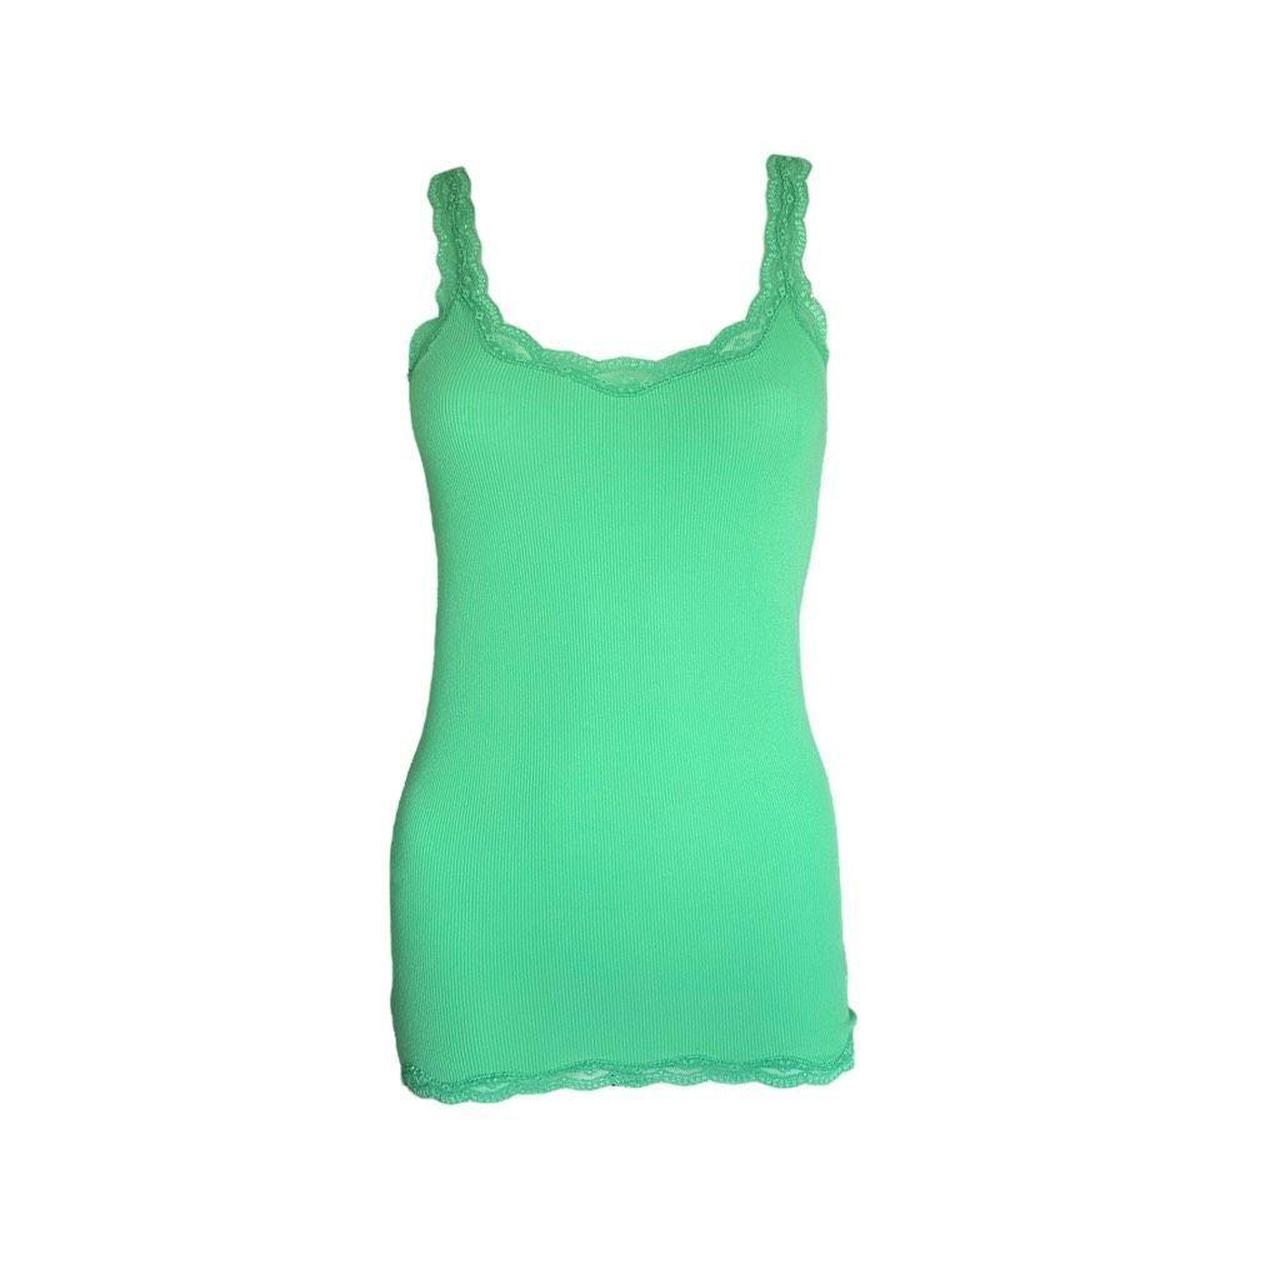 Heritage Print Lace Trim Cami Top Green, Vests, Camisoles And Sleeveless  Tops